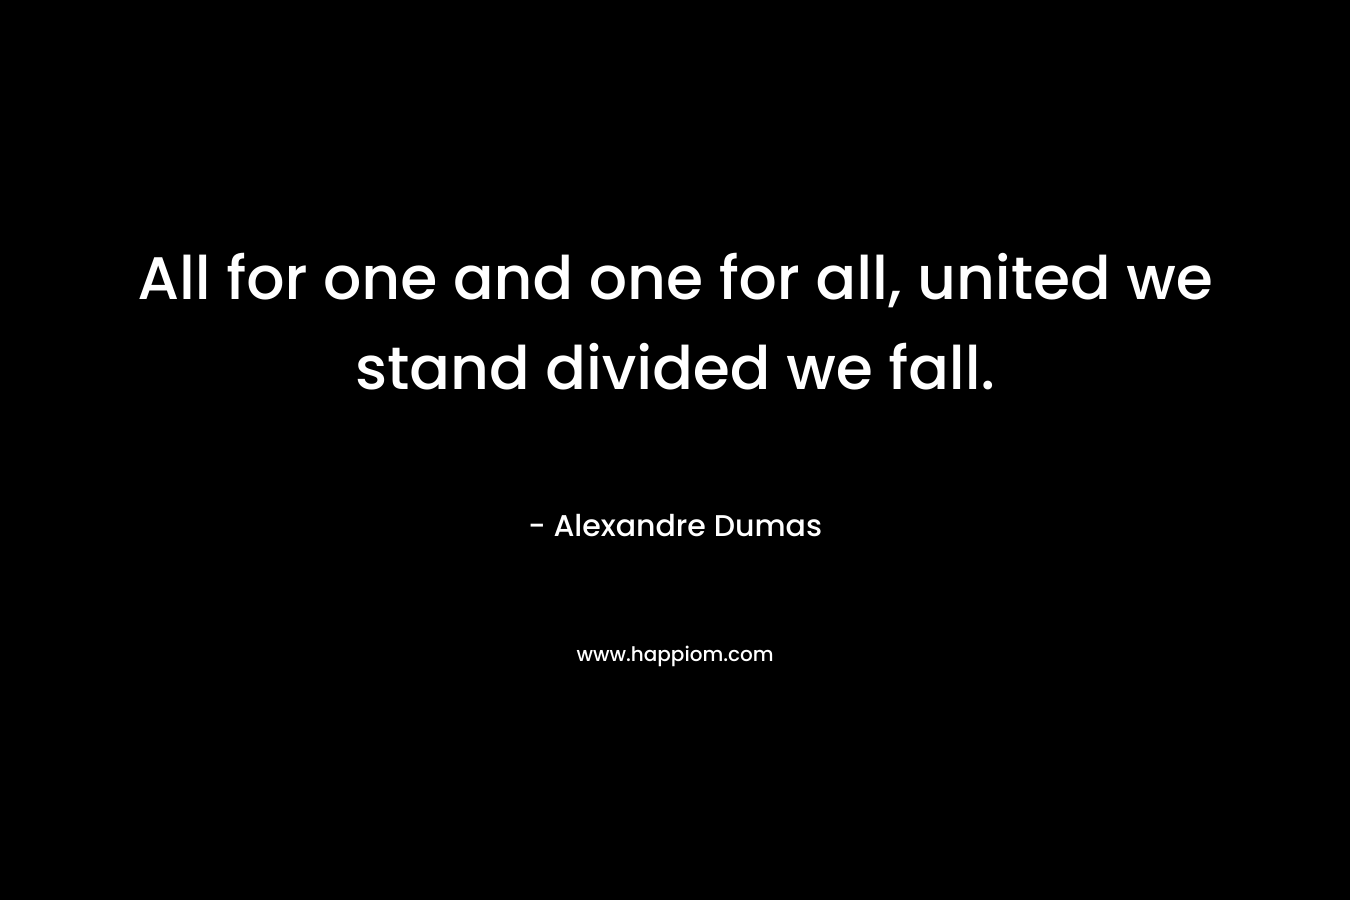 All for one and one for all, united we stand divided we fall. – Alexandre Dumas